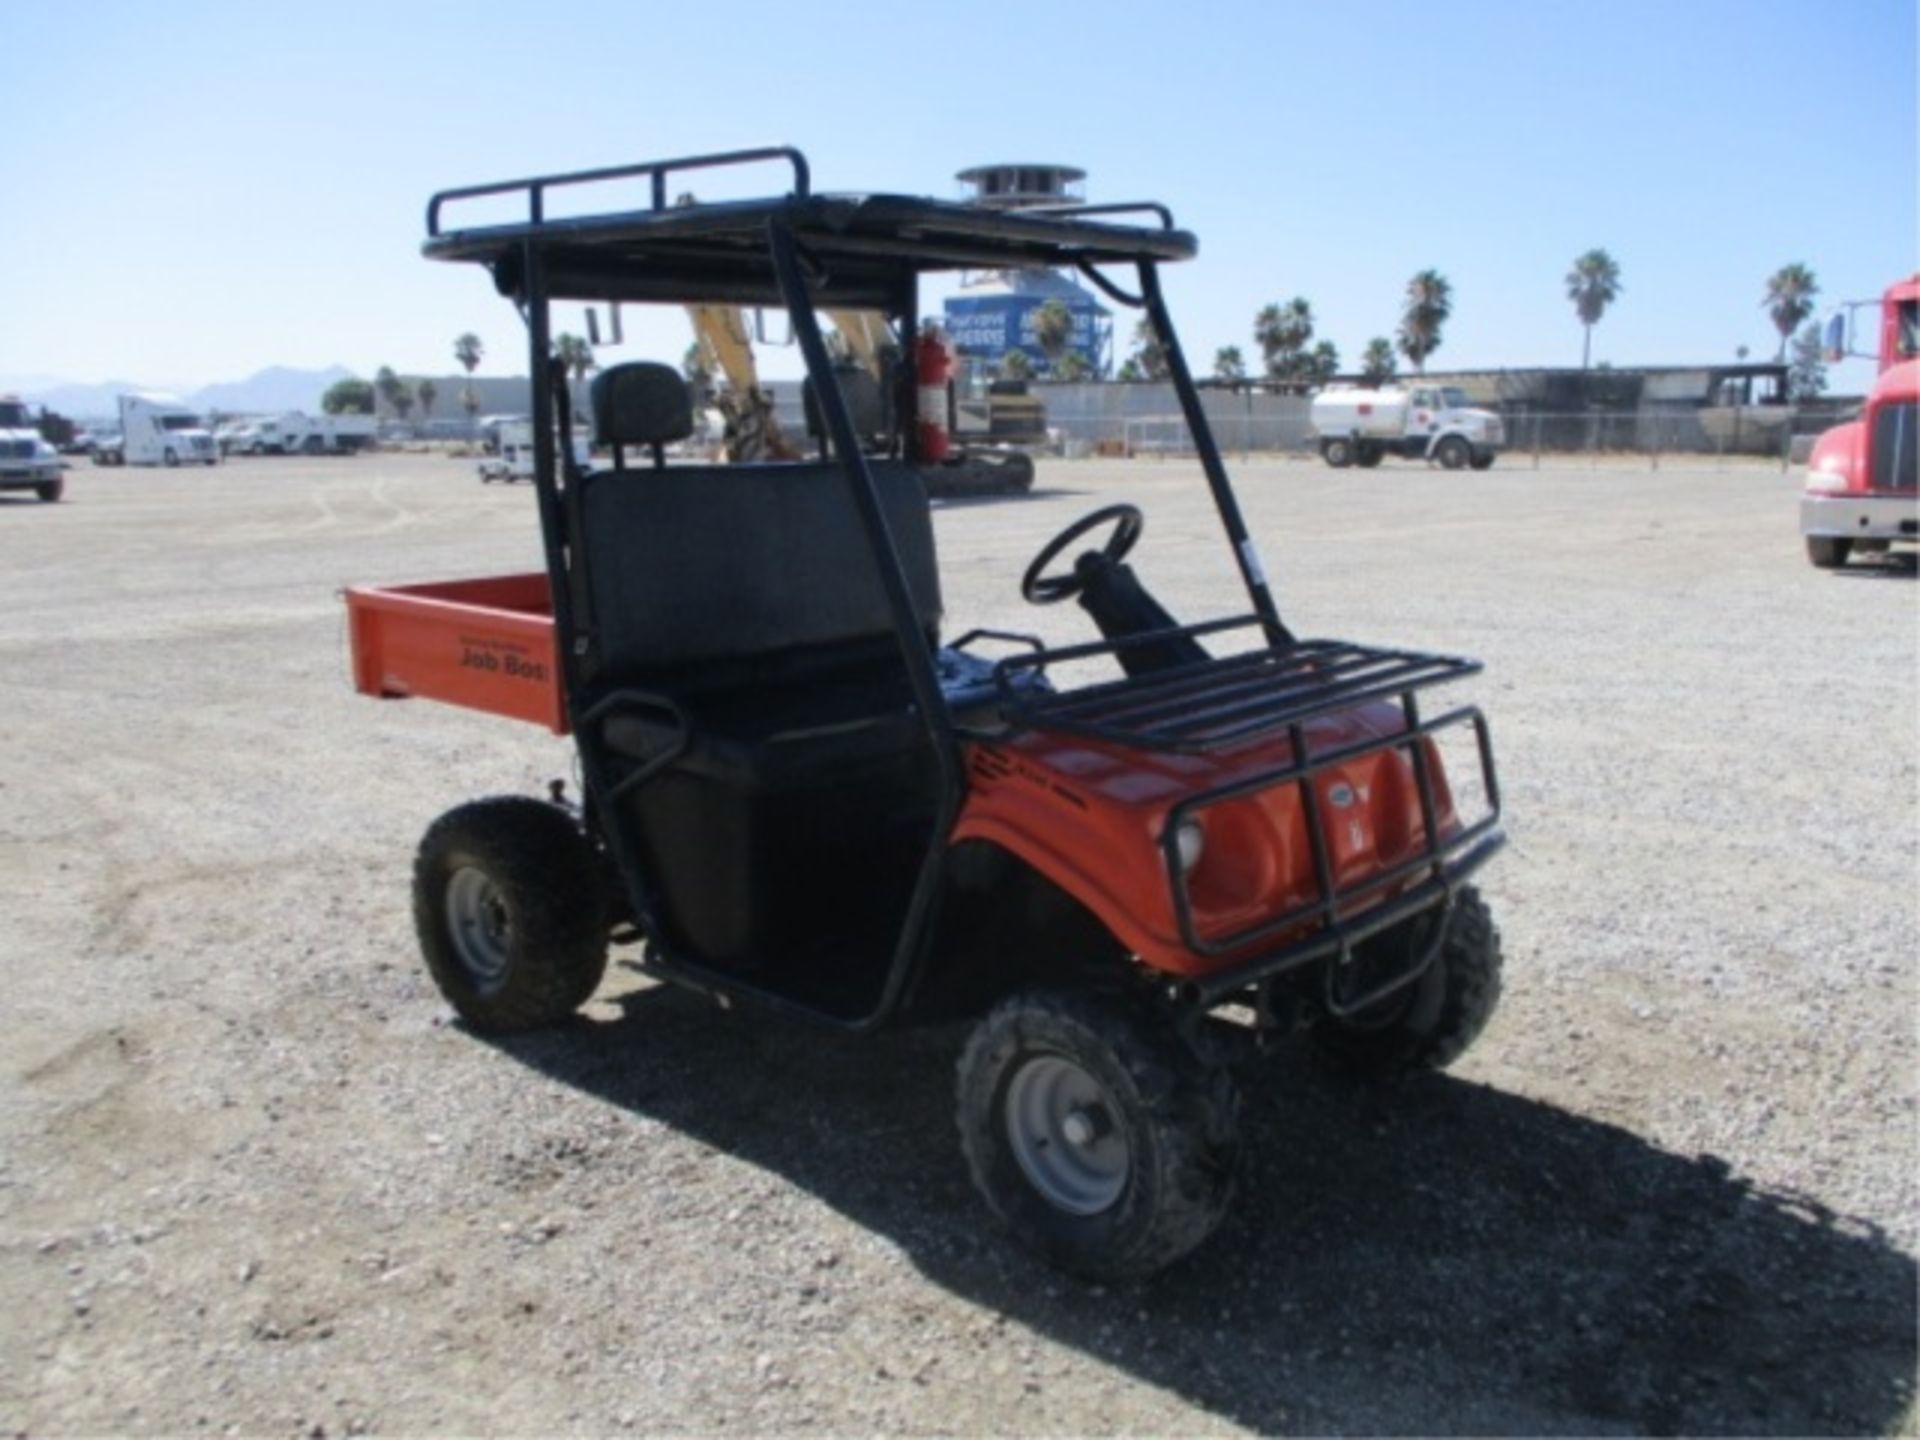 2008 American Sportworks Job Boss Utility Cart, Honda Gas, Rear Metal Dump Bed, Canopy, Tow Hitch, - Image 8 of 50